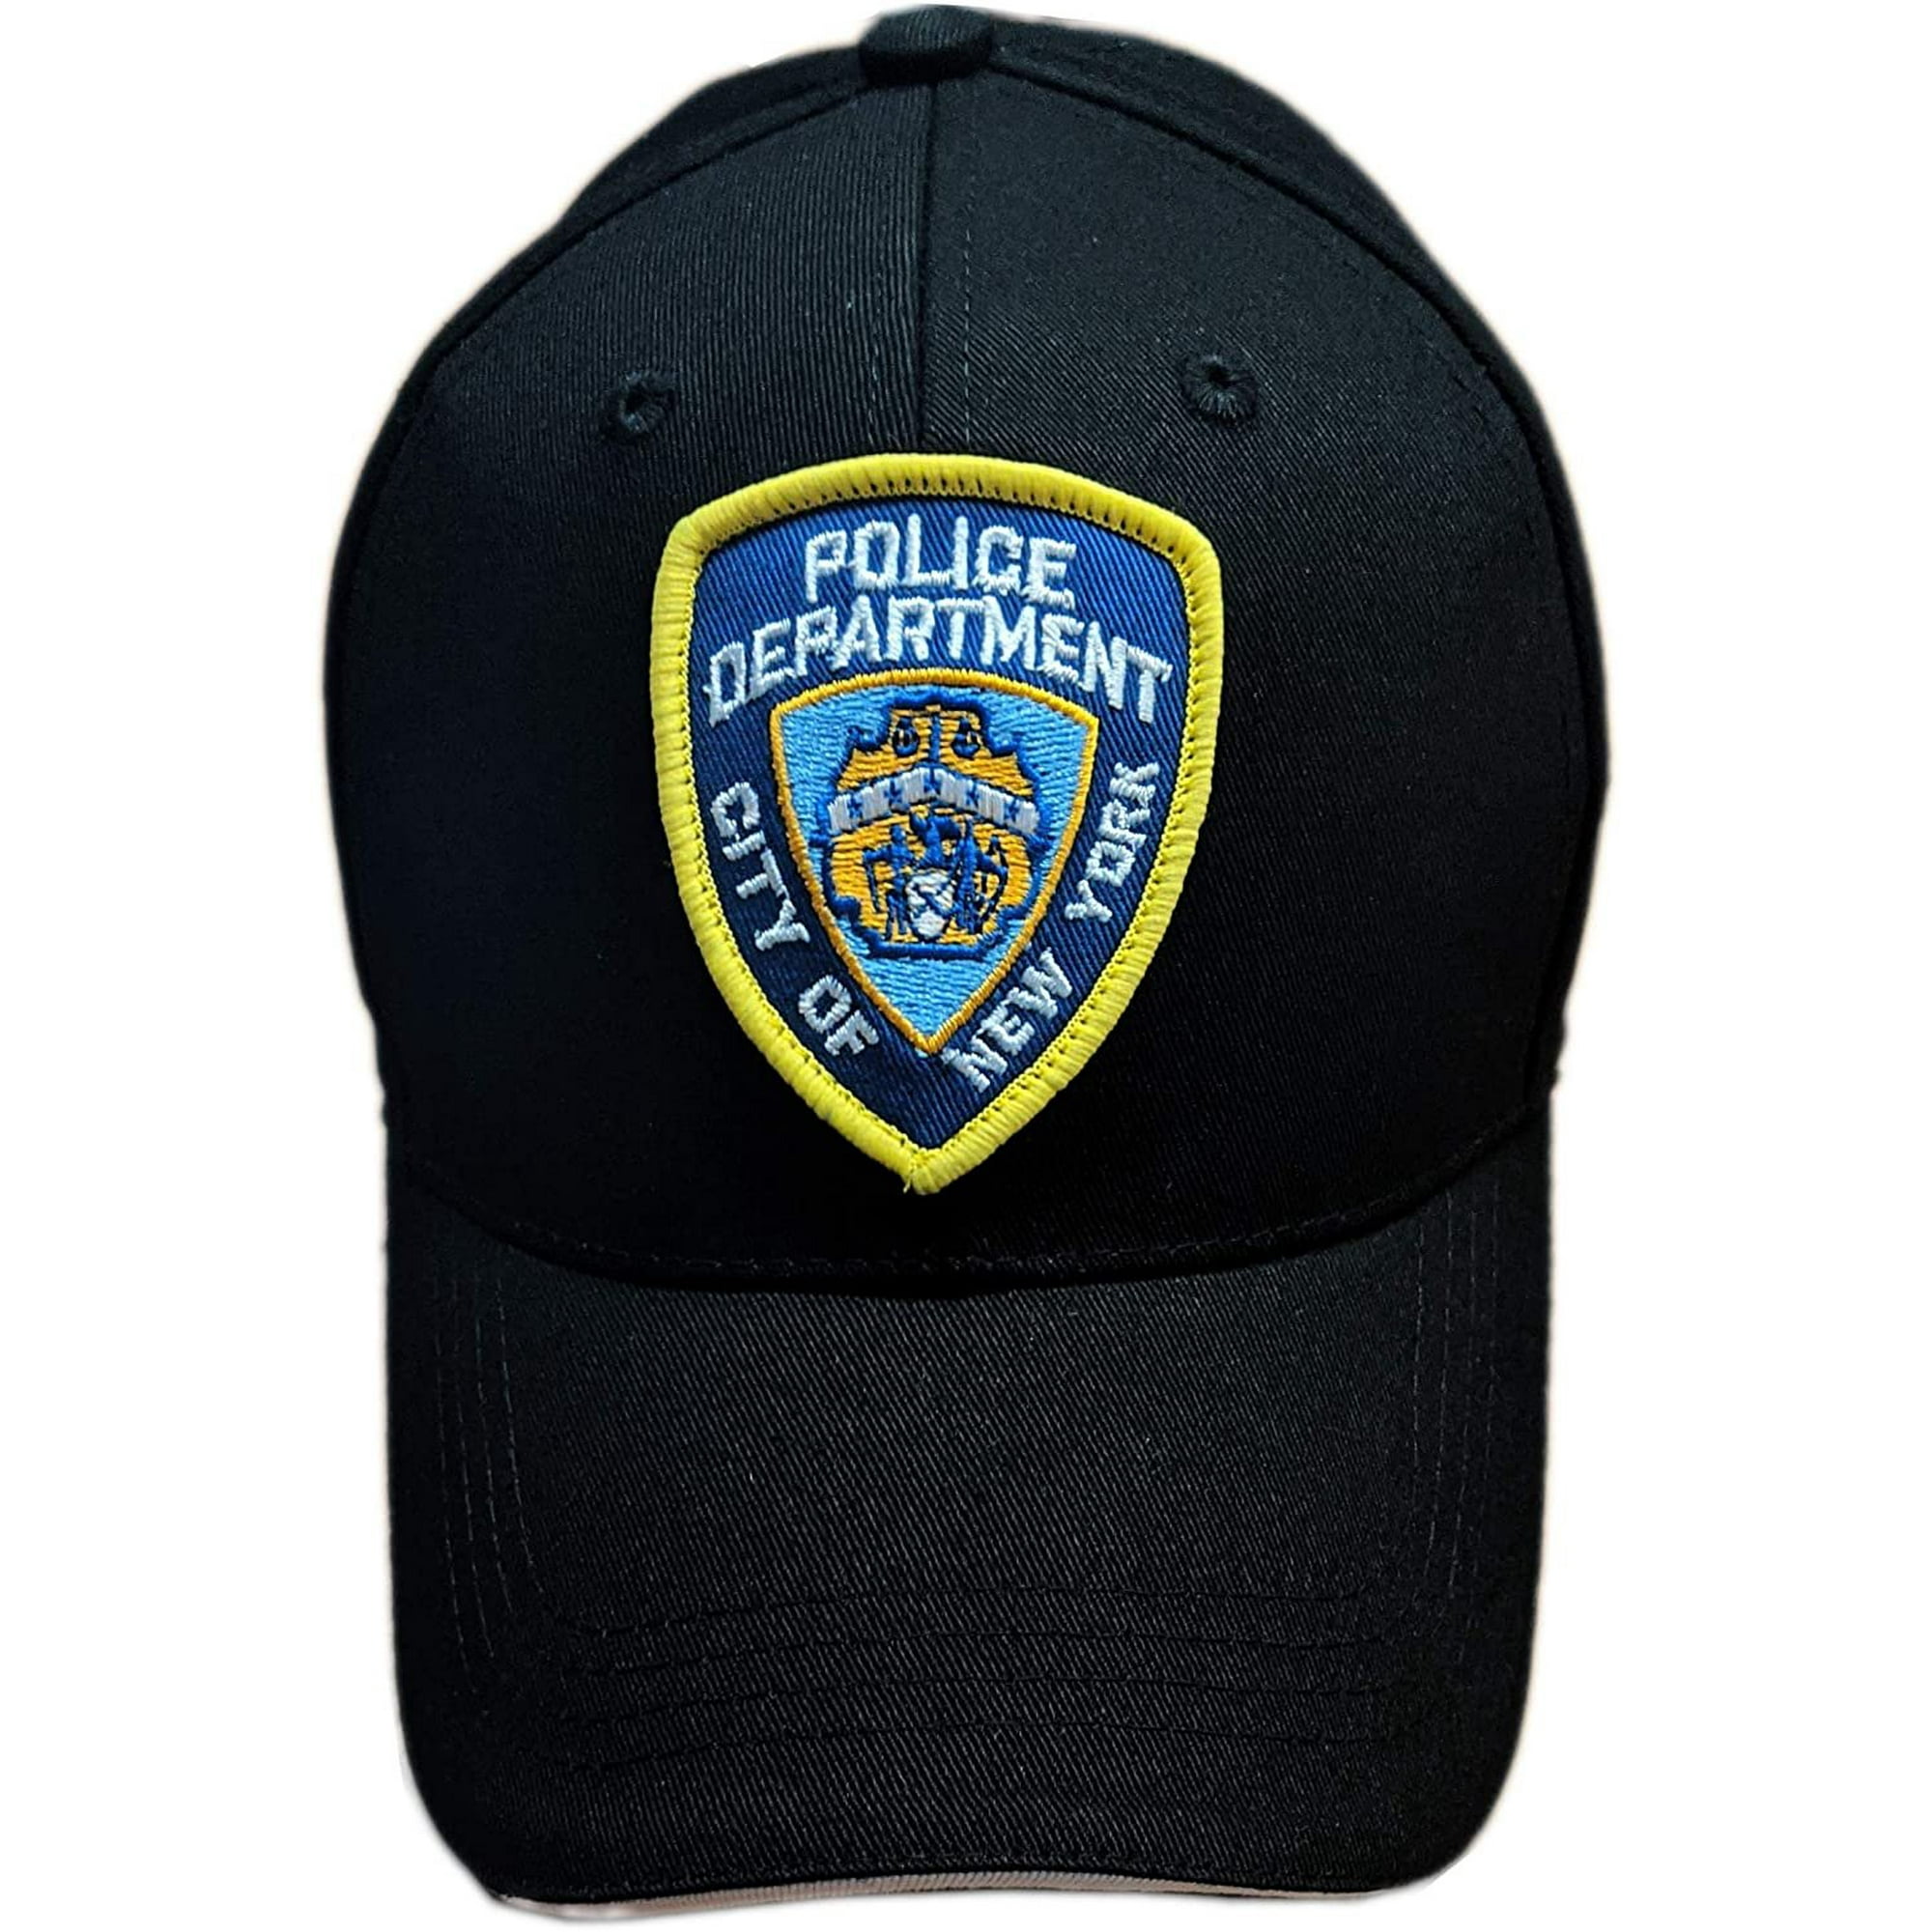 NYPD Baseball Hat New York Police Department Light Blue & Navy One Size 